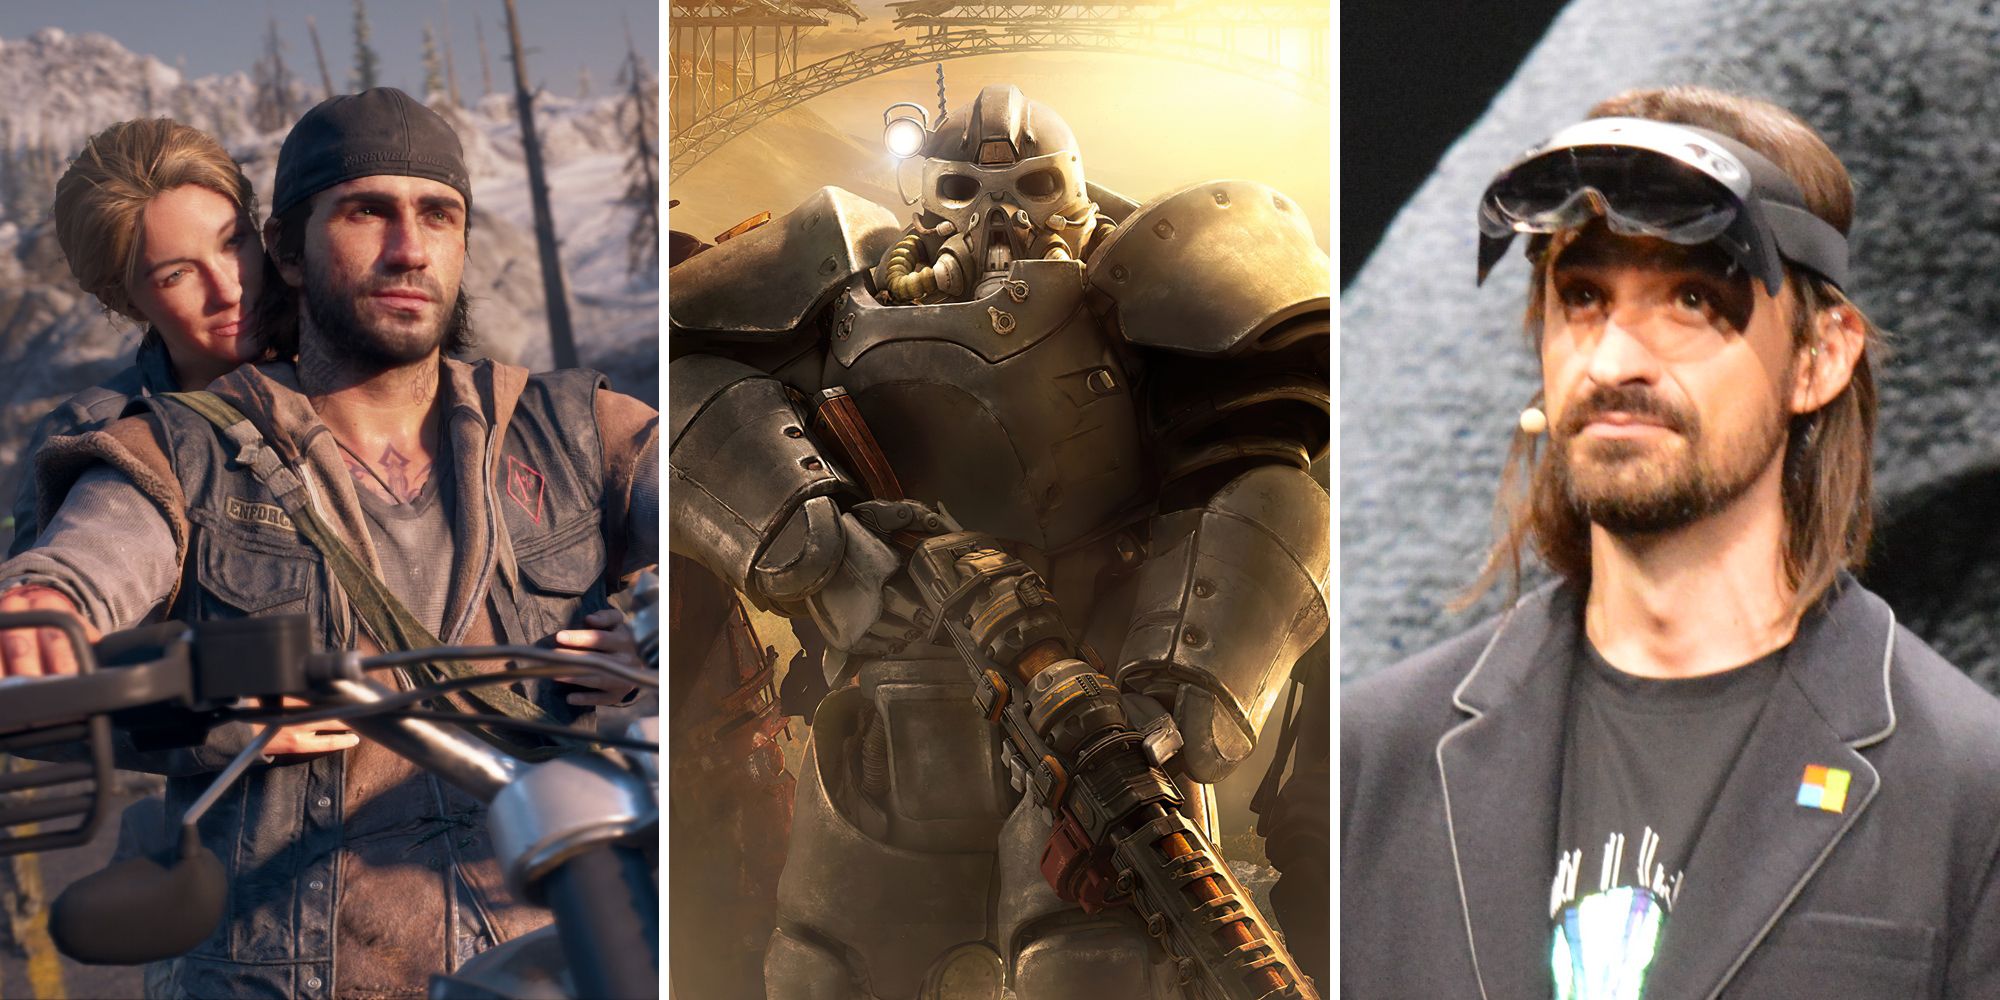 Deacon from Days Gone, man in Power Armour from Fallout 76, and HoloLens creator Alex Kipman